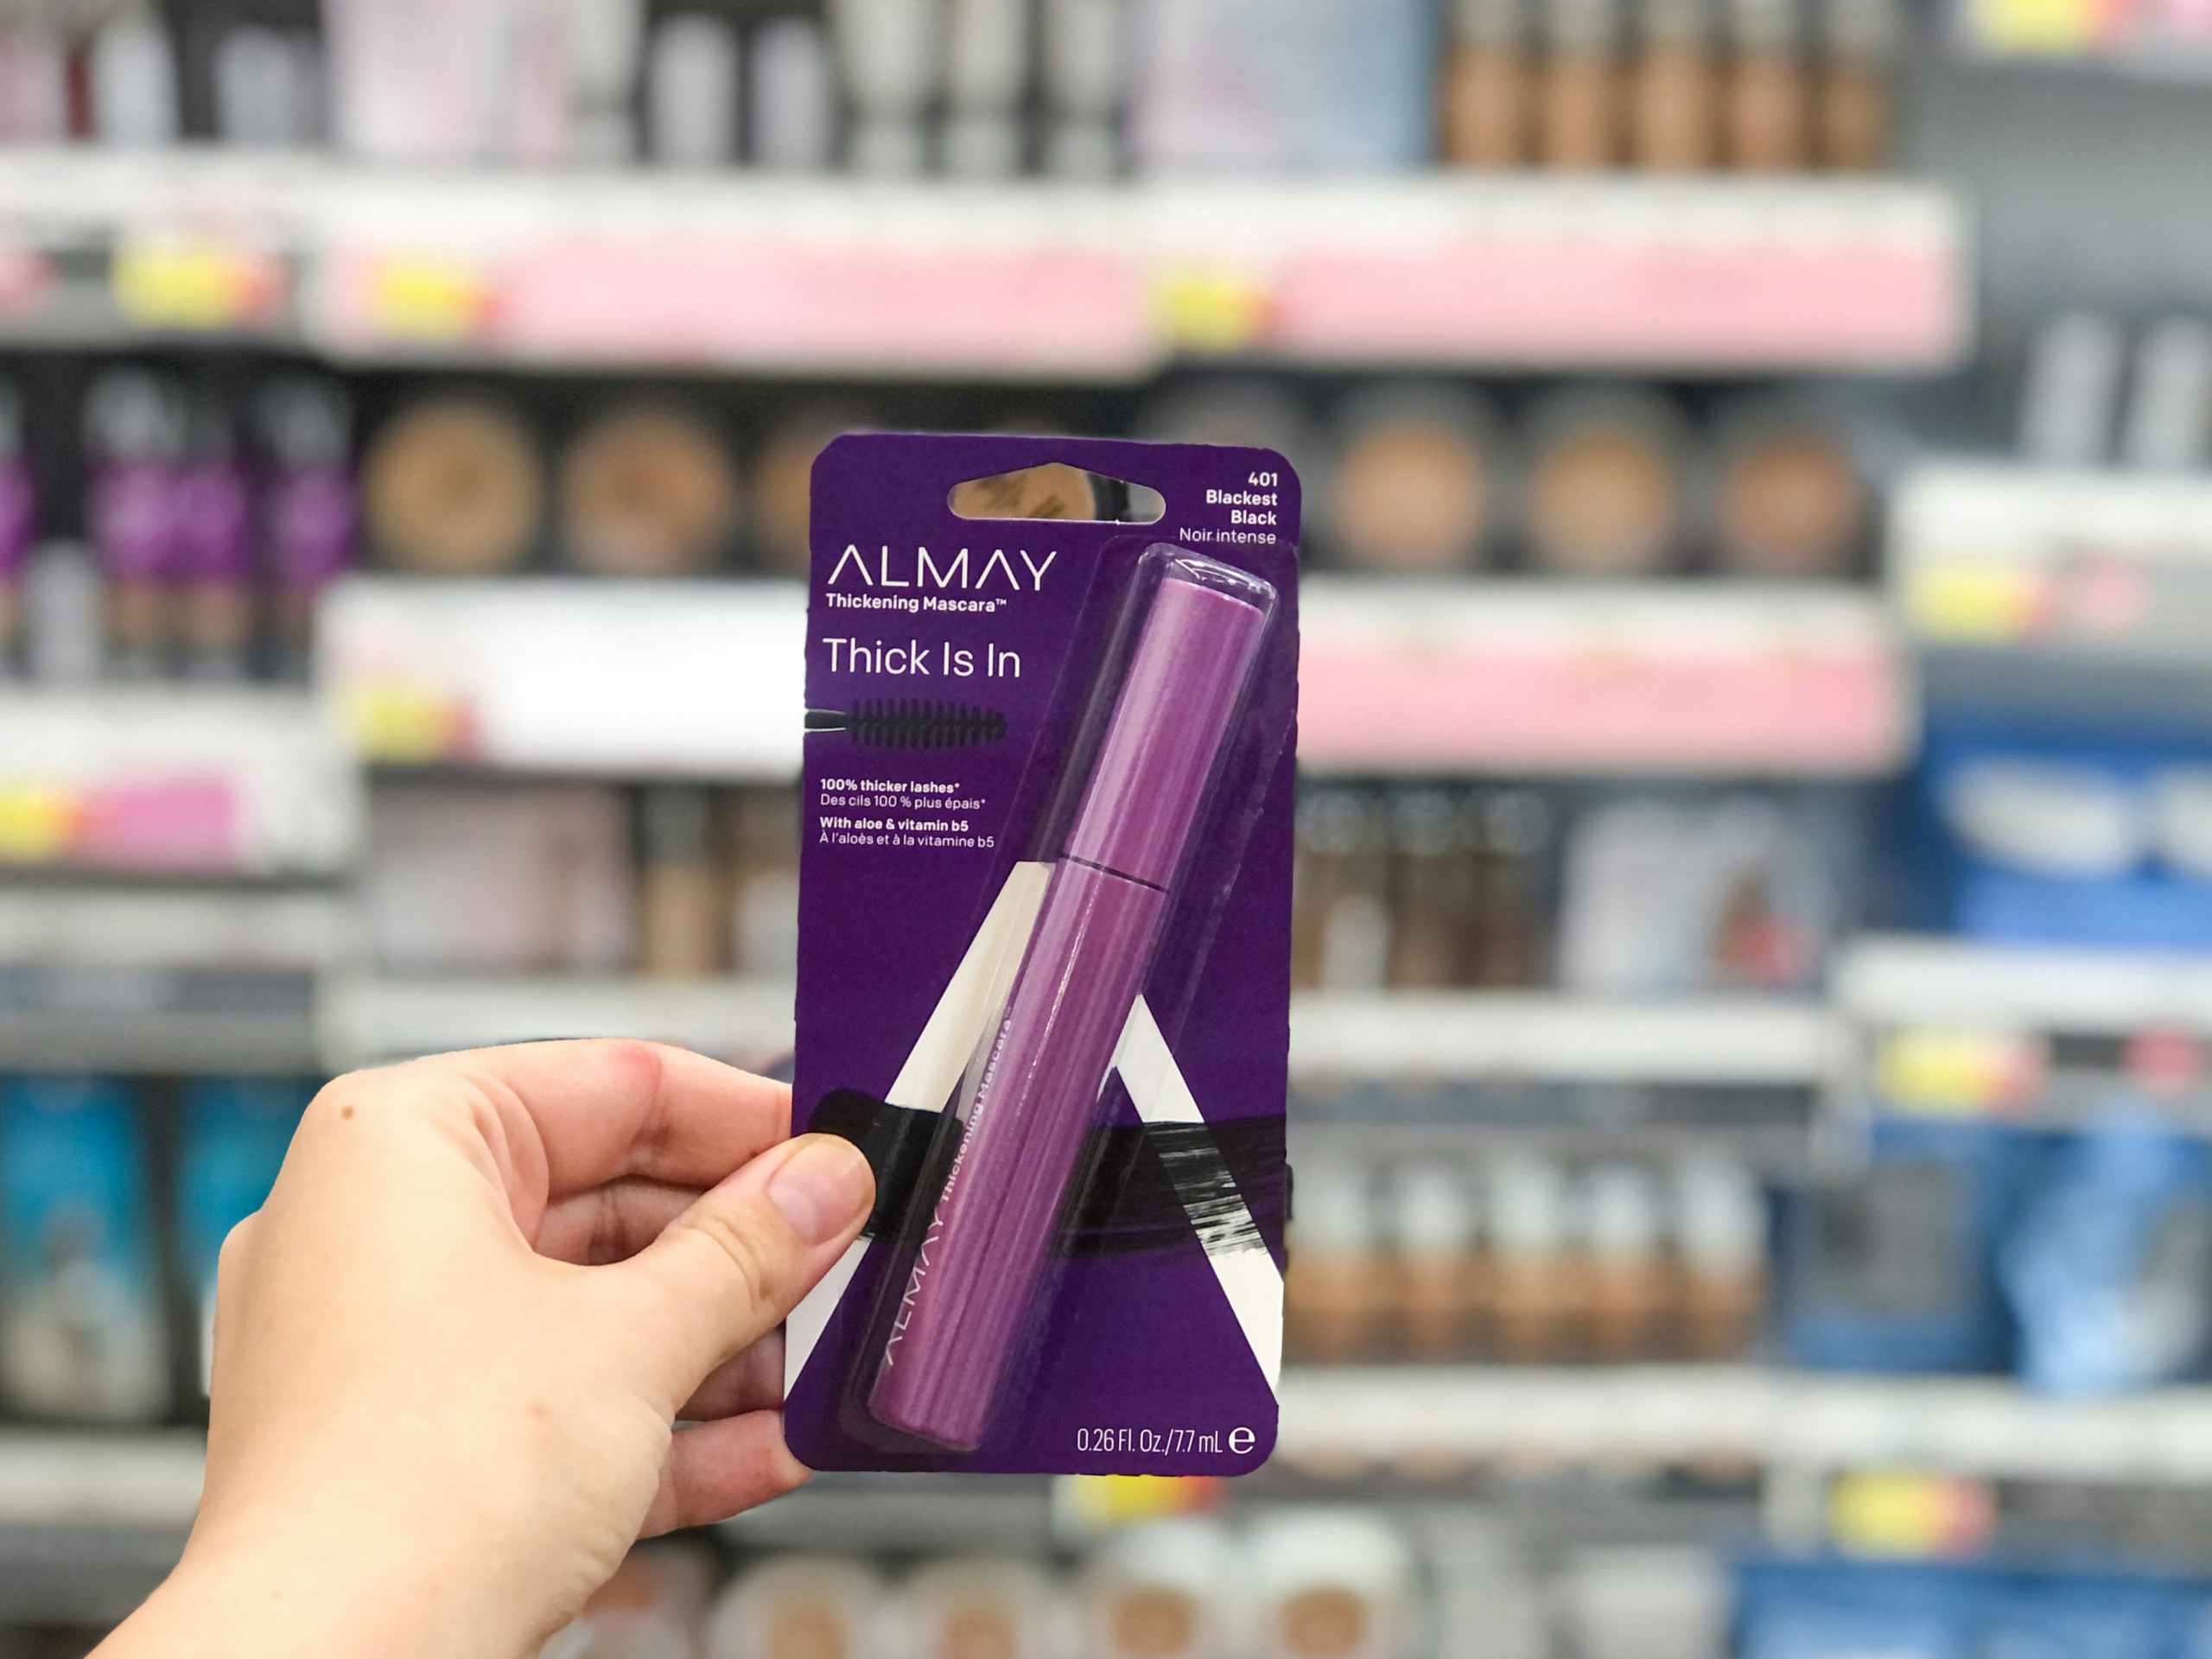 holding almay mascara package in front of makeup shelf